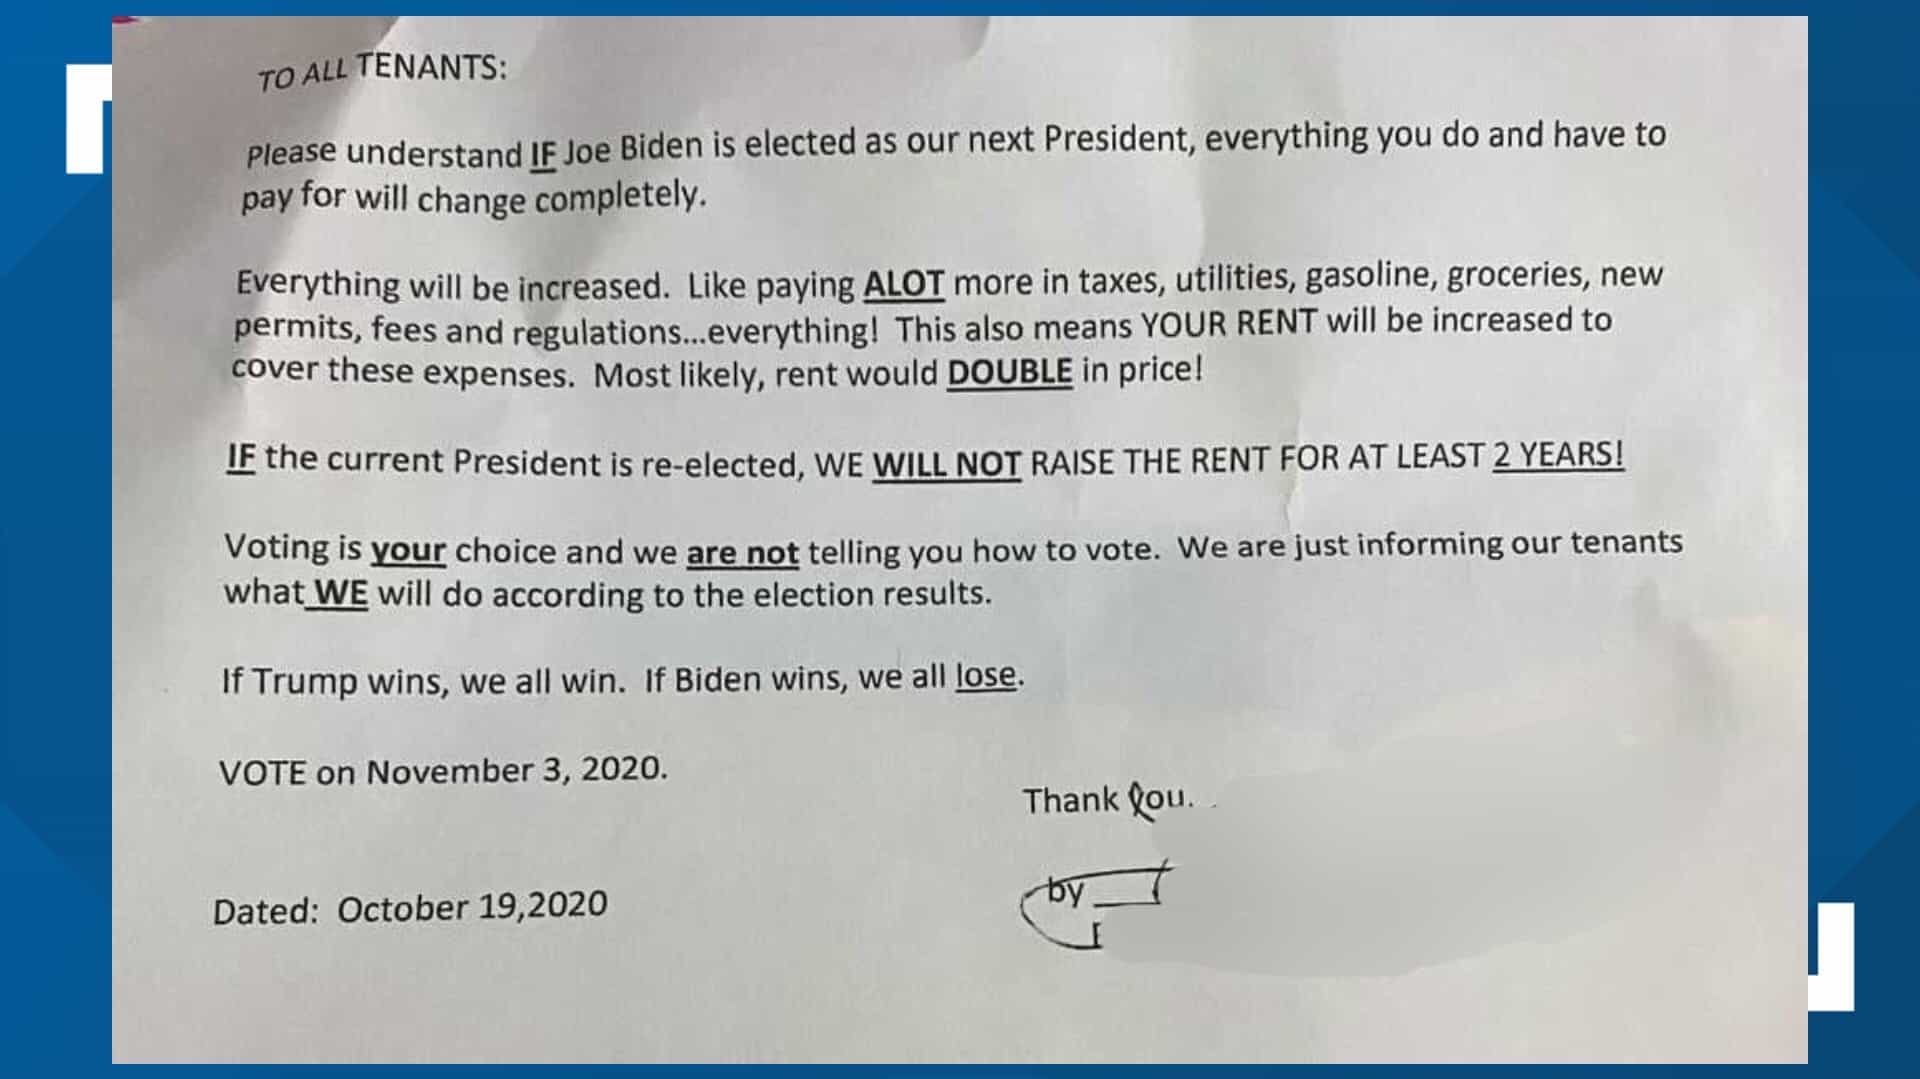 Letter from landlord